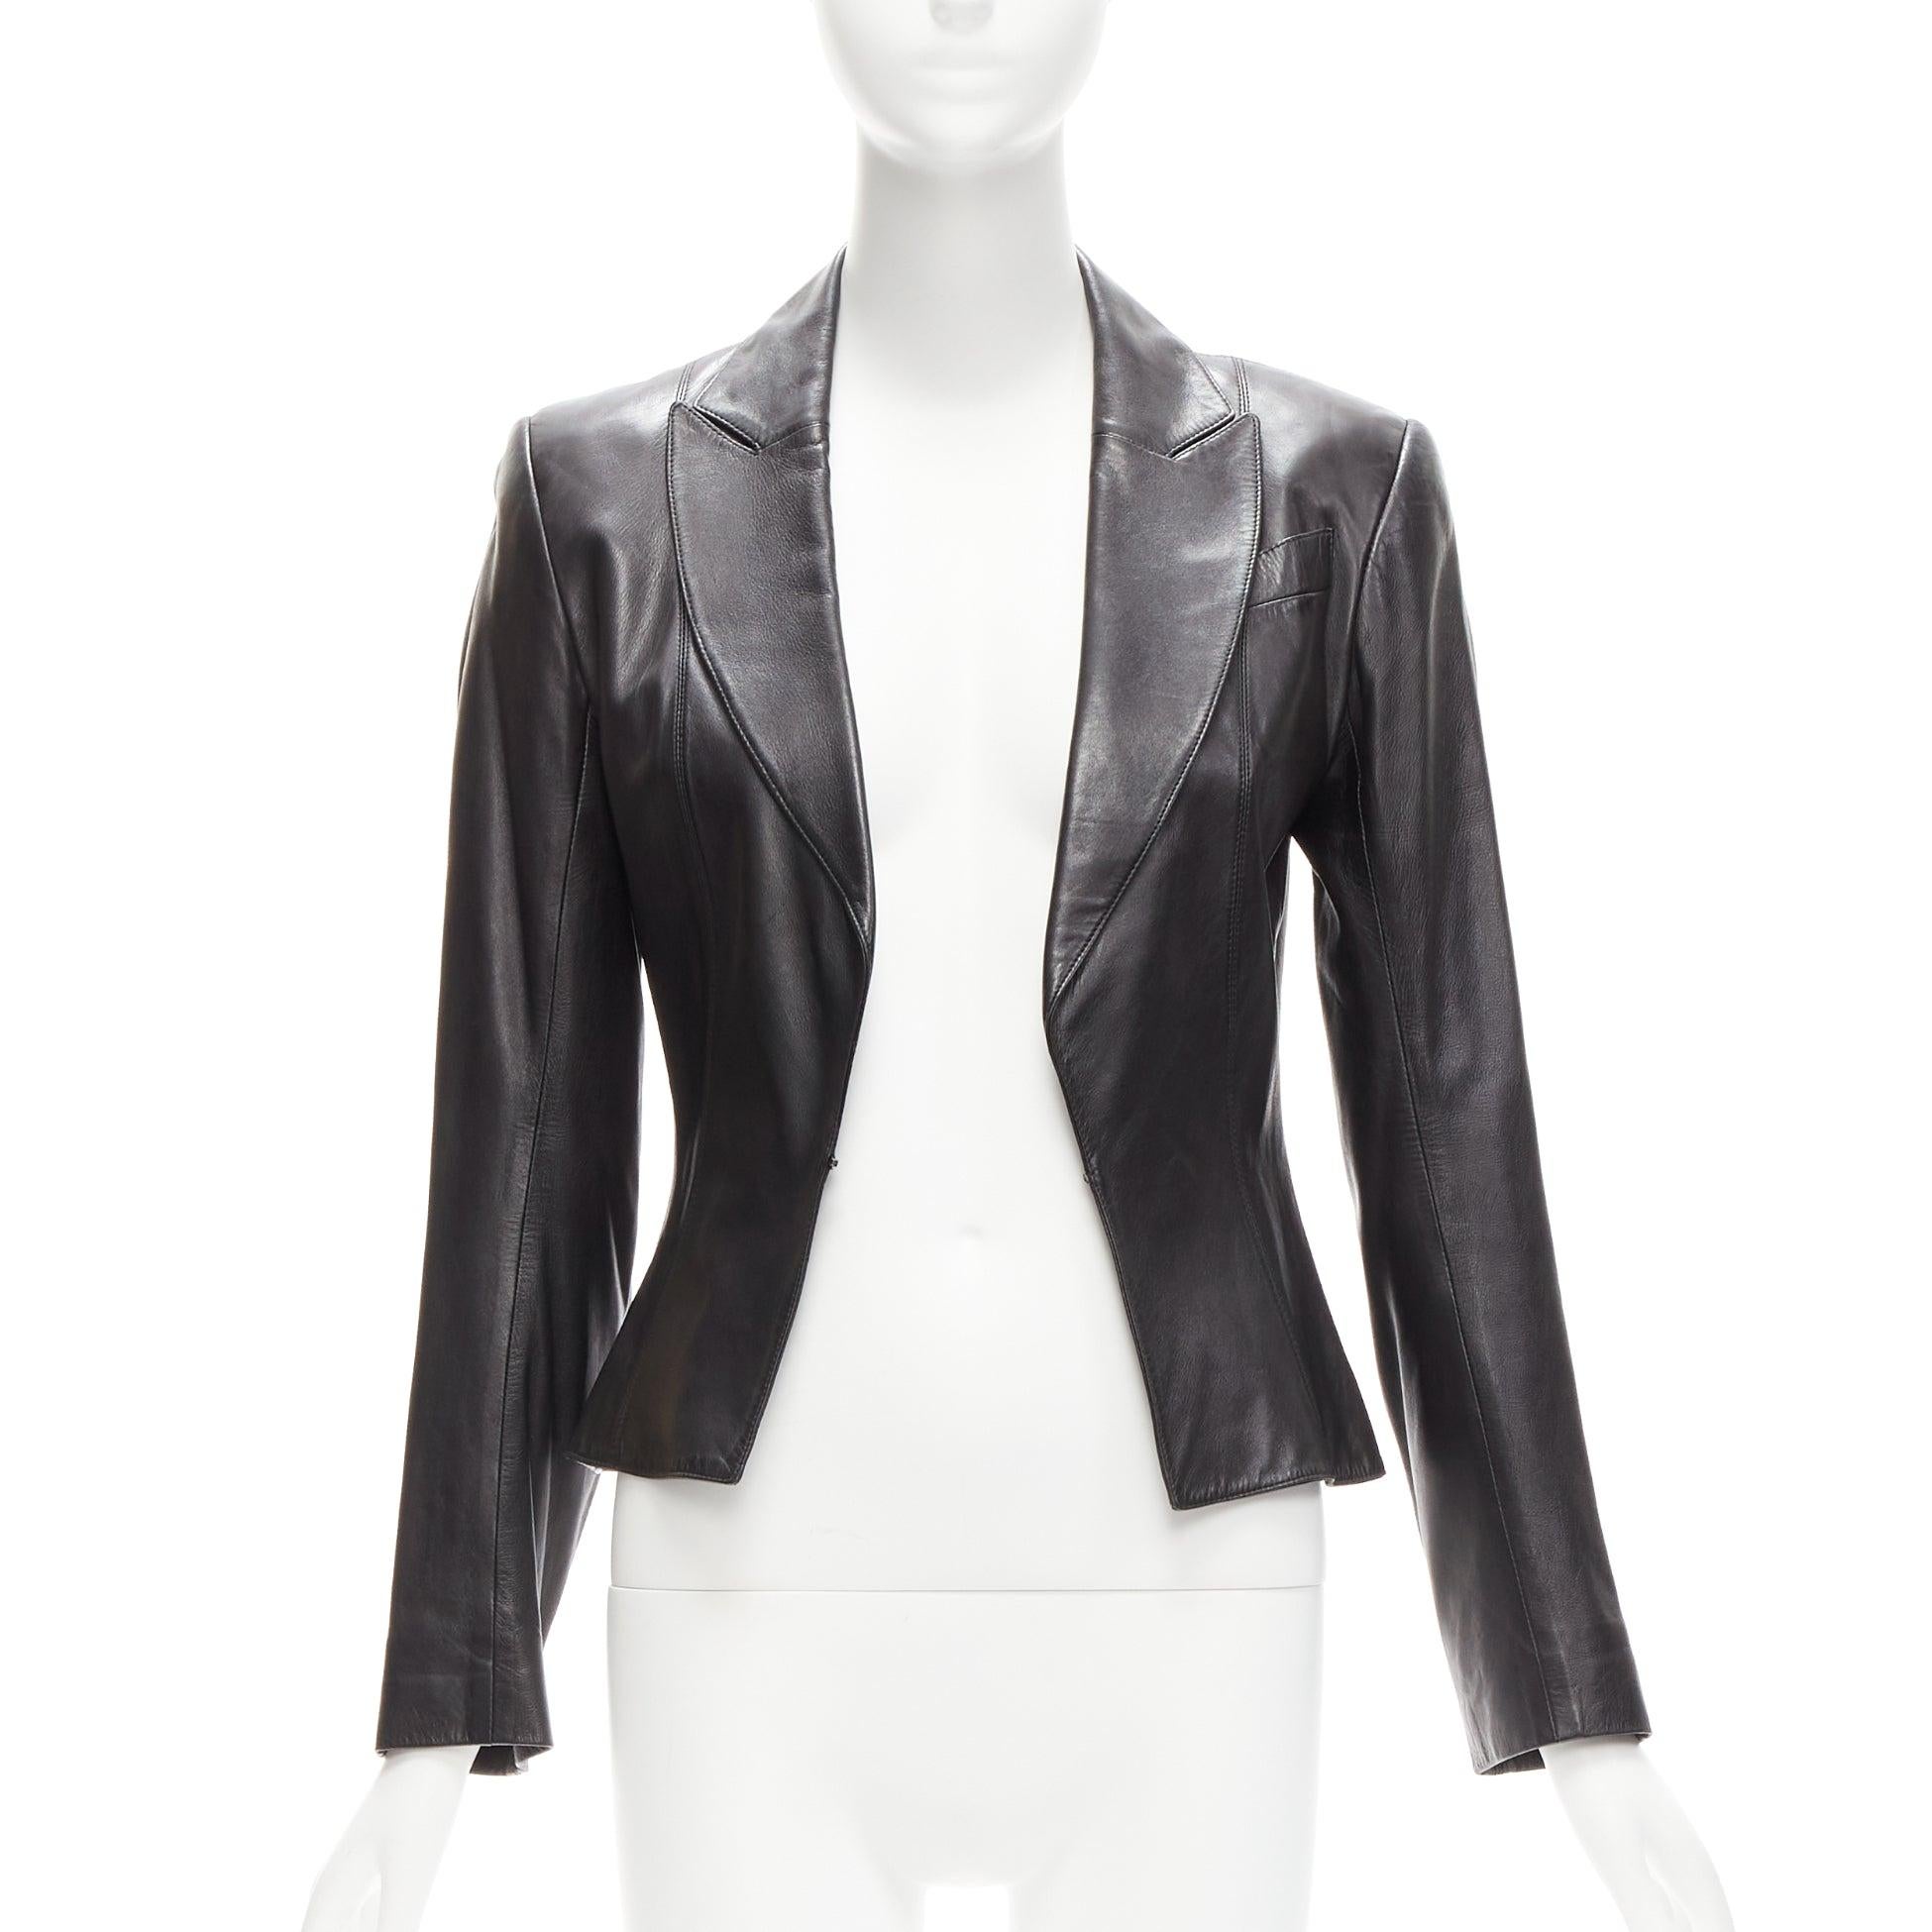 CHRISTIAN DIOR Galliano Vintage black lambskin leather blazer jacket FR40 L
Reference: TGAS/D00954
Brand: Christian Dior
Designer: John Galliano
Material: Lambskin Leather
Color: Black
Pattern: Solid
Closure: Hook & Eye
Lining: Black Silk
Extra